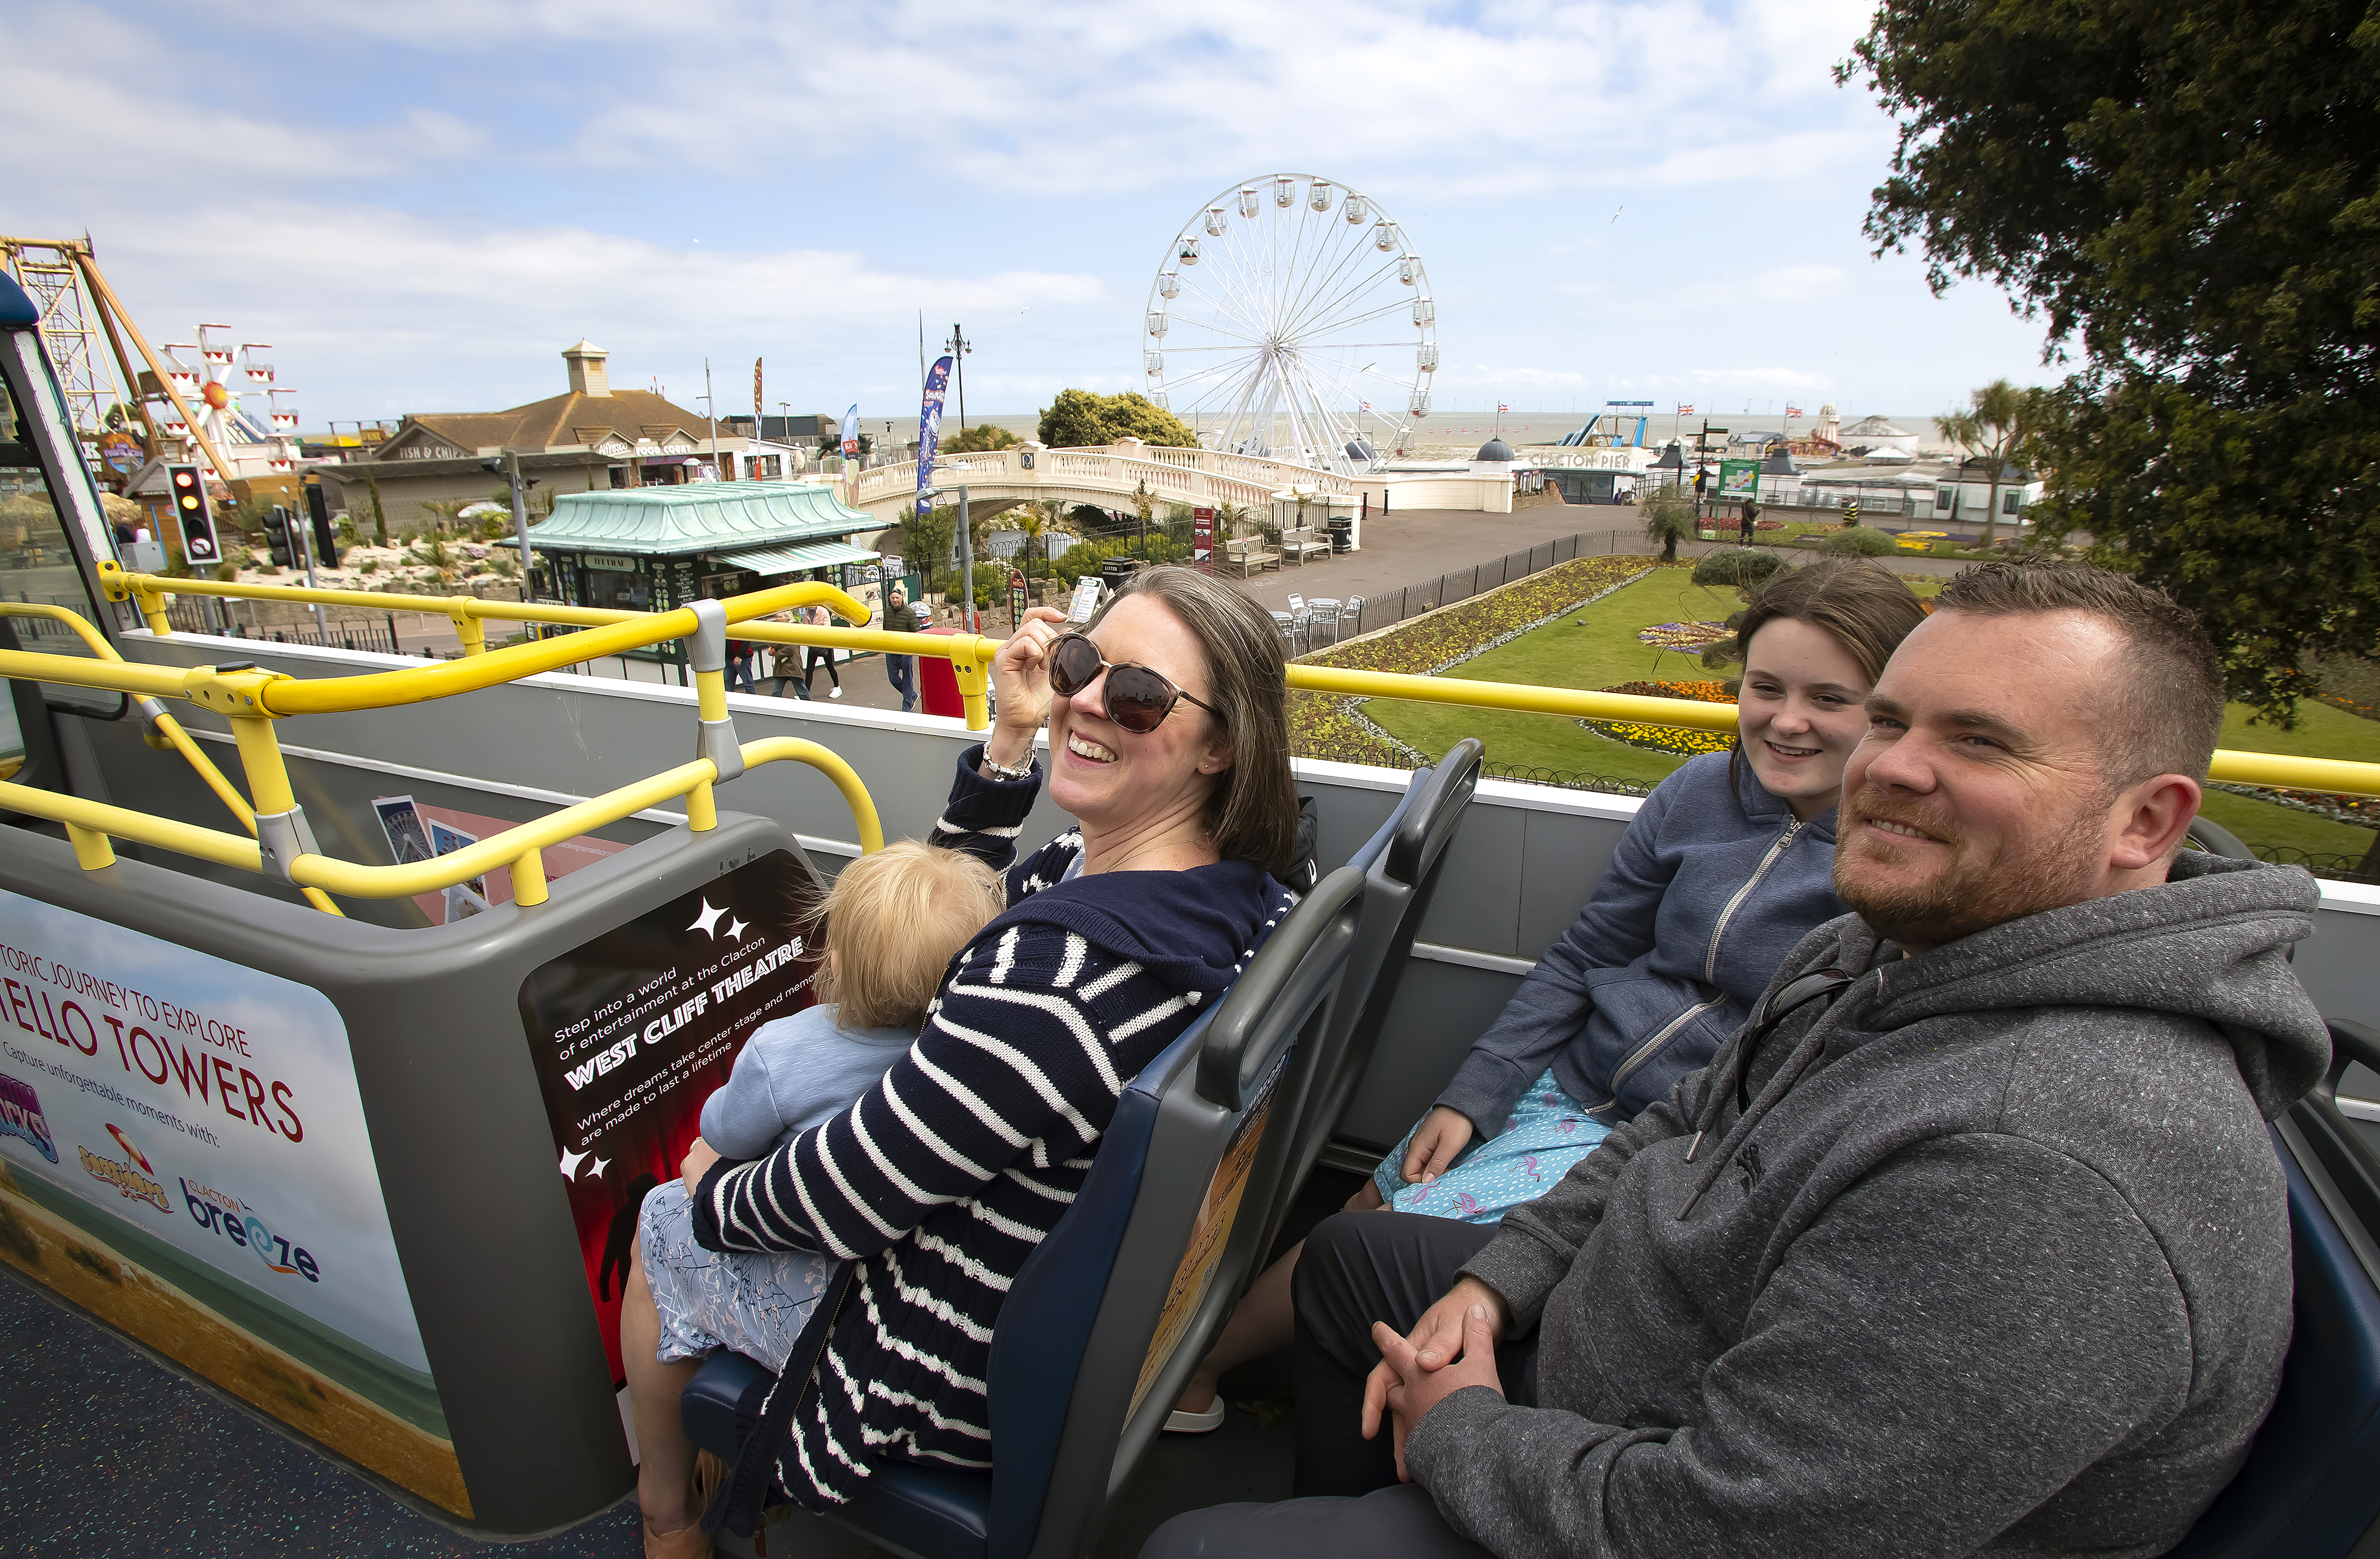 A Family on the top of an open top bus in Clacton over looking the Clacton Pier